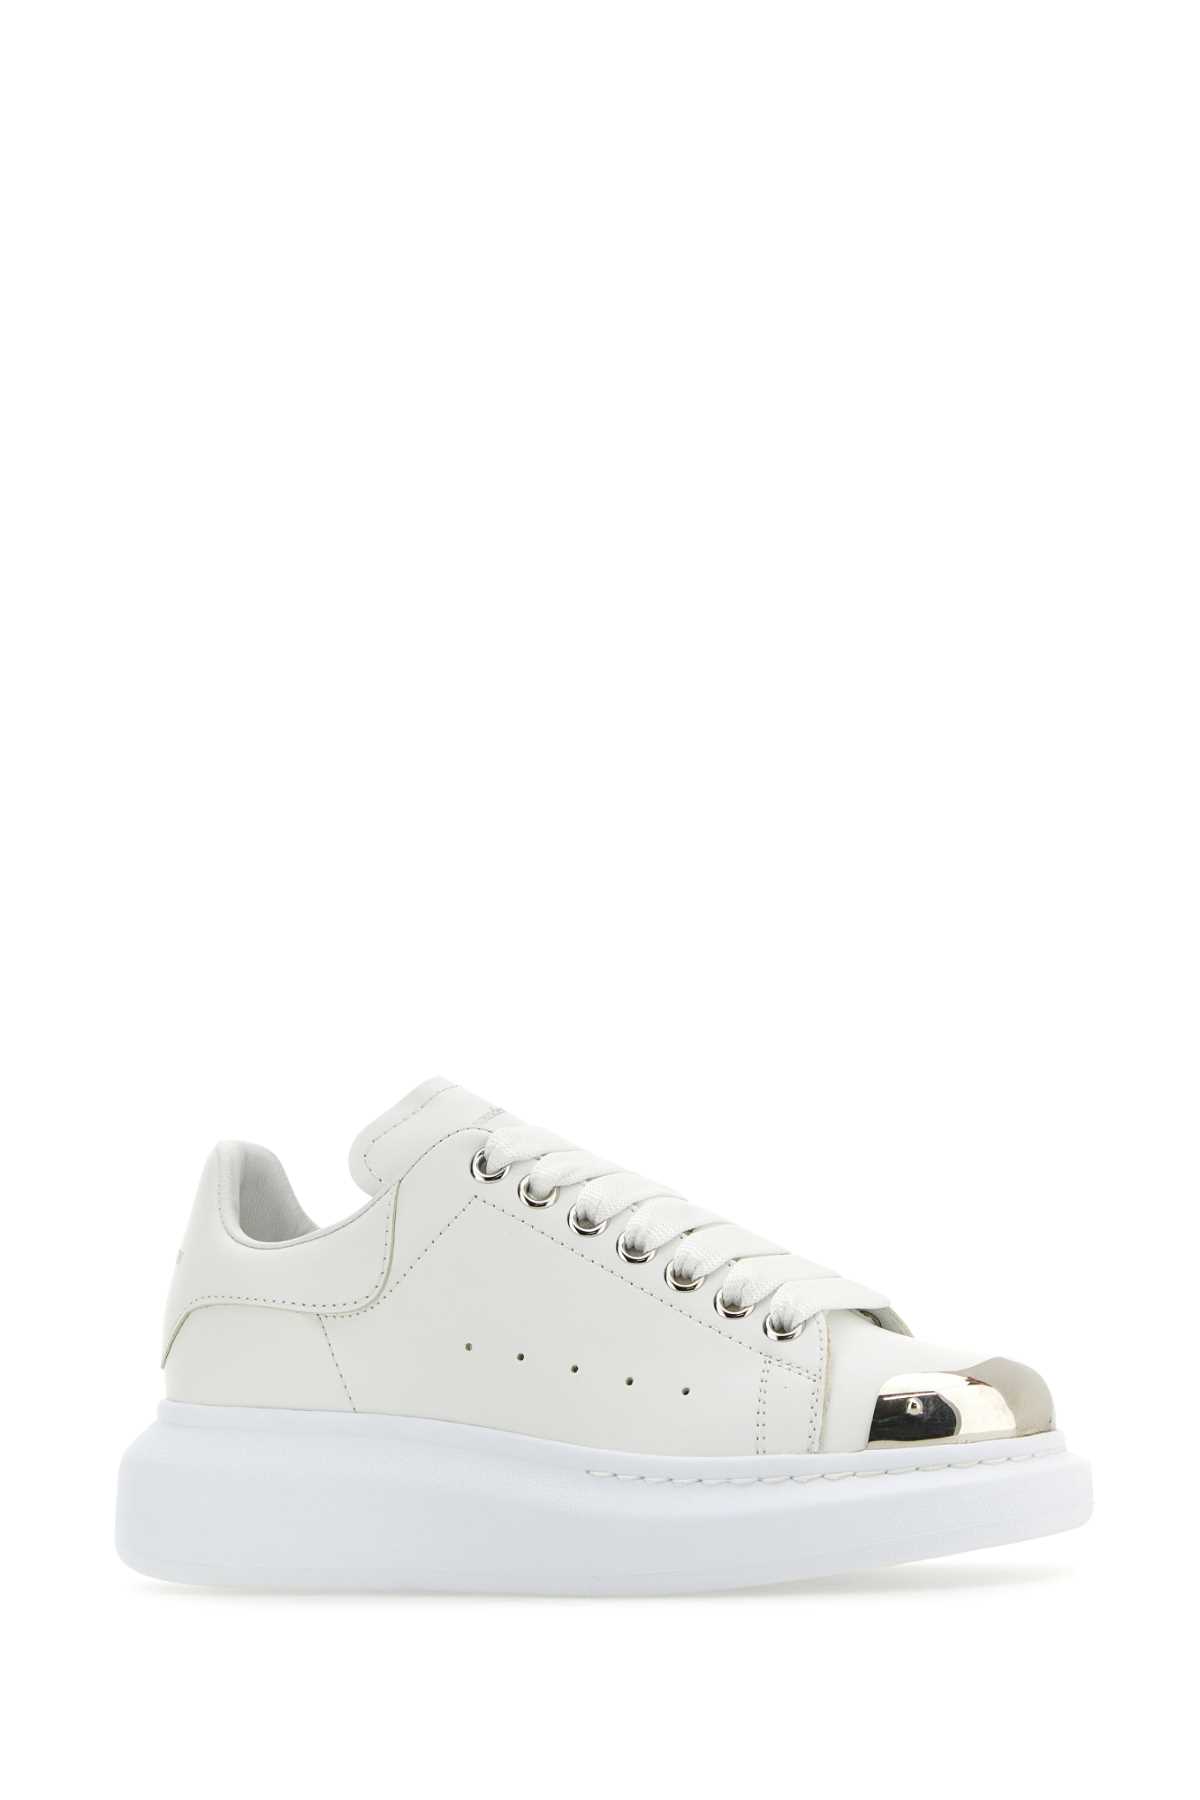 ALEXANDER MCQUEEN WHITE LEATHER SNEAKERS